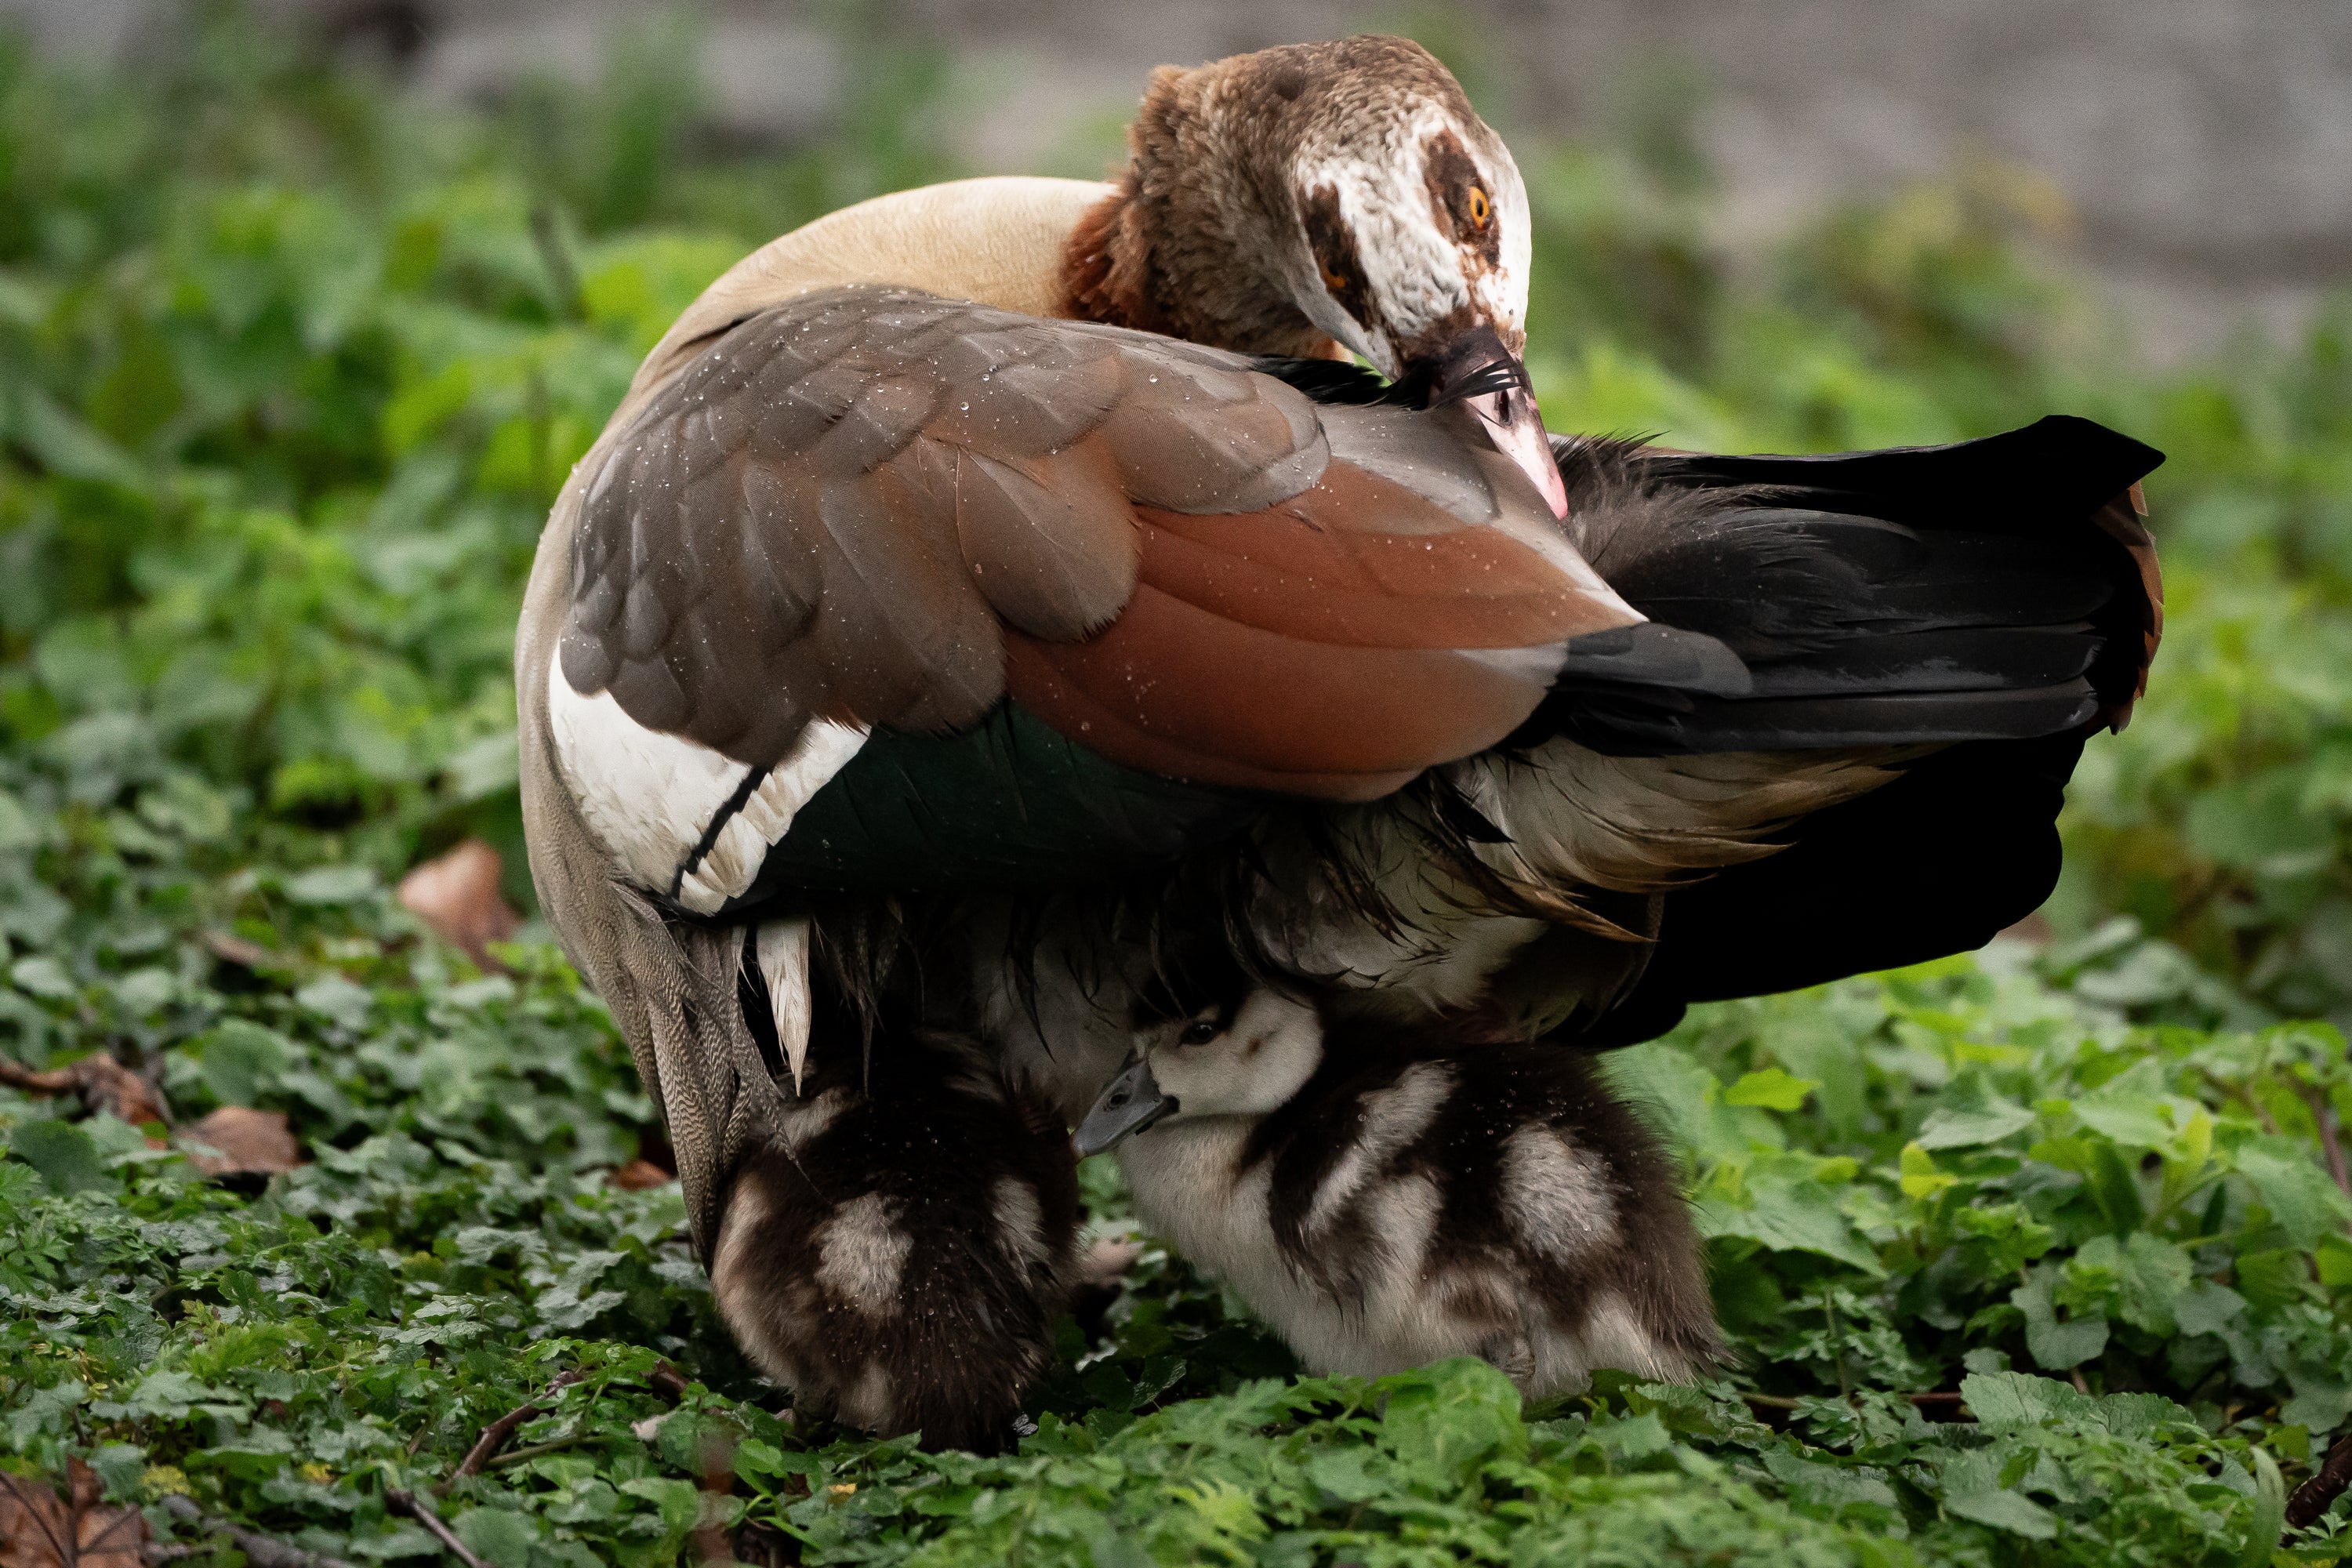 An Egyptian goose protects its gosling from the rain in St Jame’s Park in London on Thursday